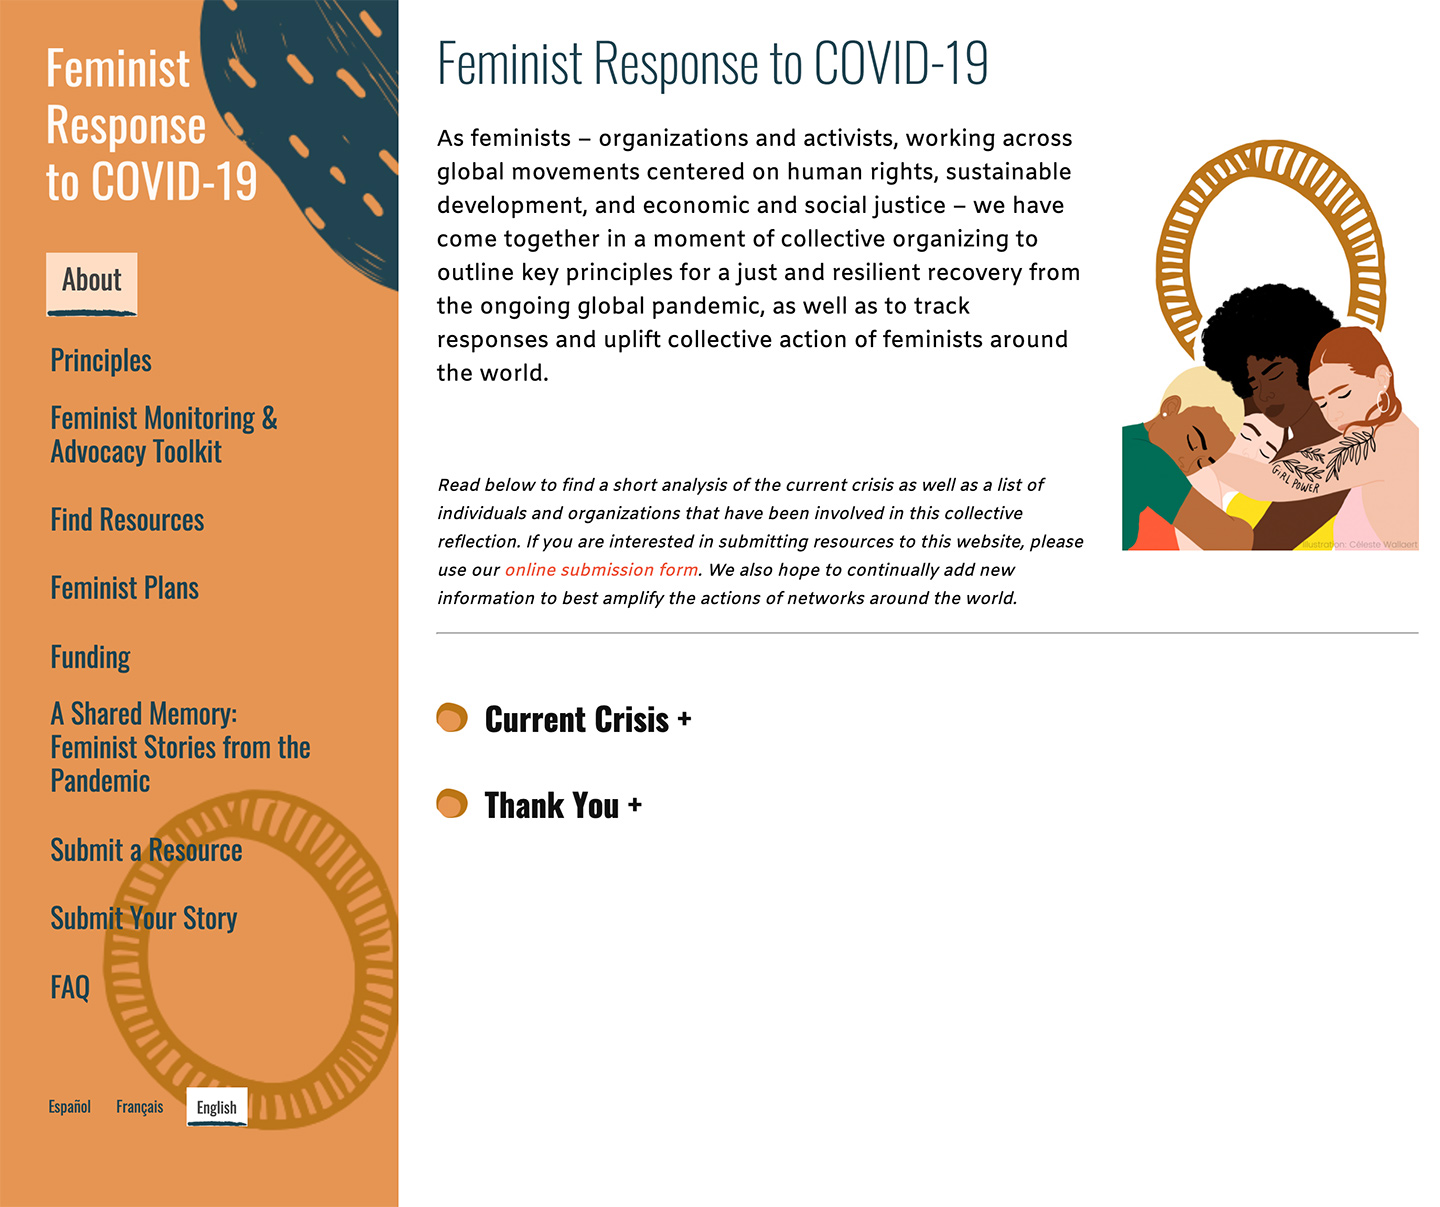 Feminist Response to COVID-19: Feminist Response to Covid-19 - Homepage